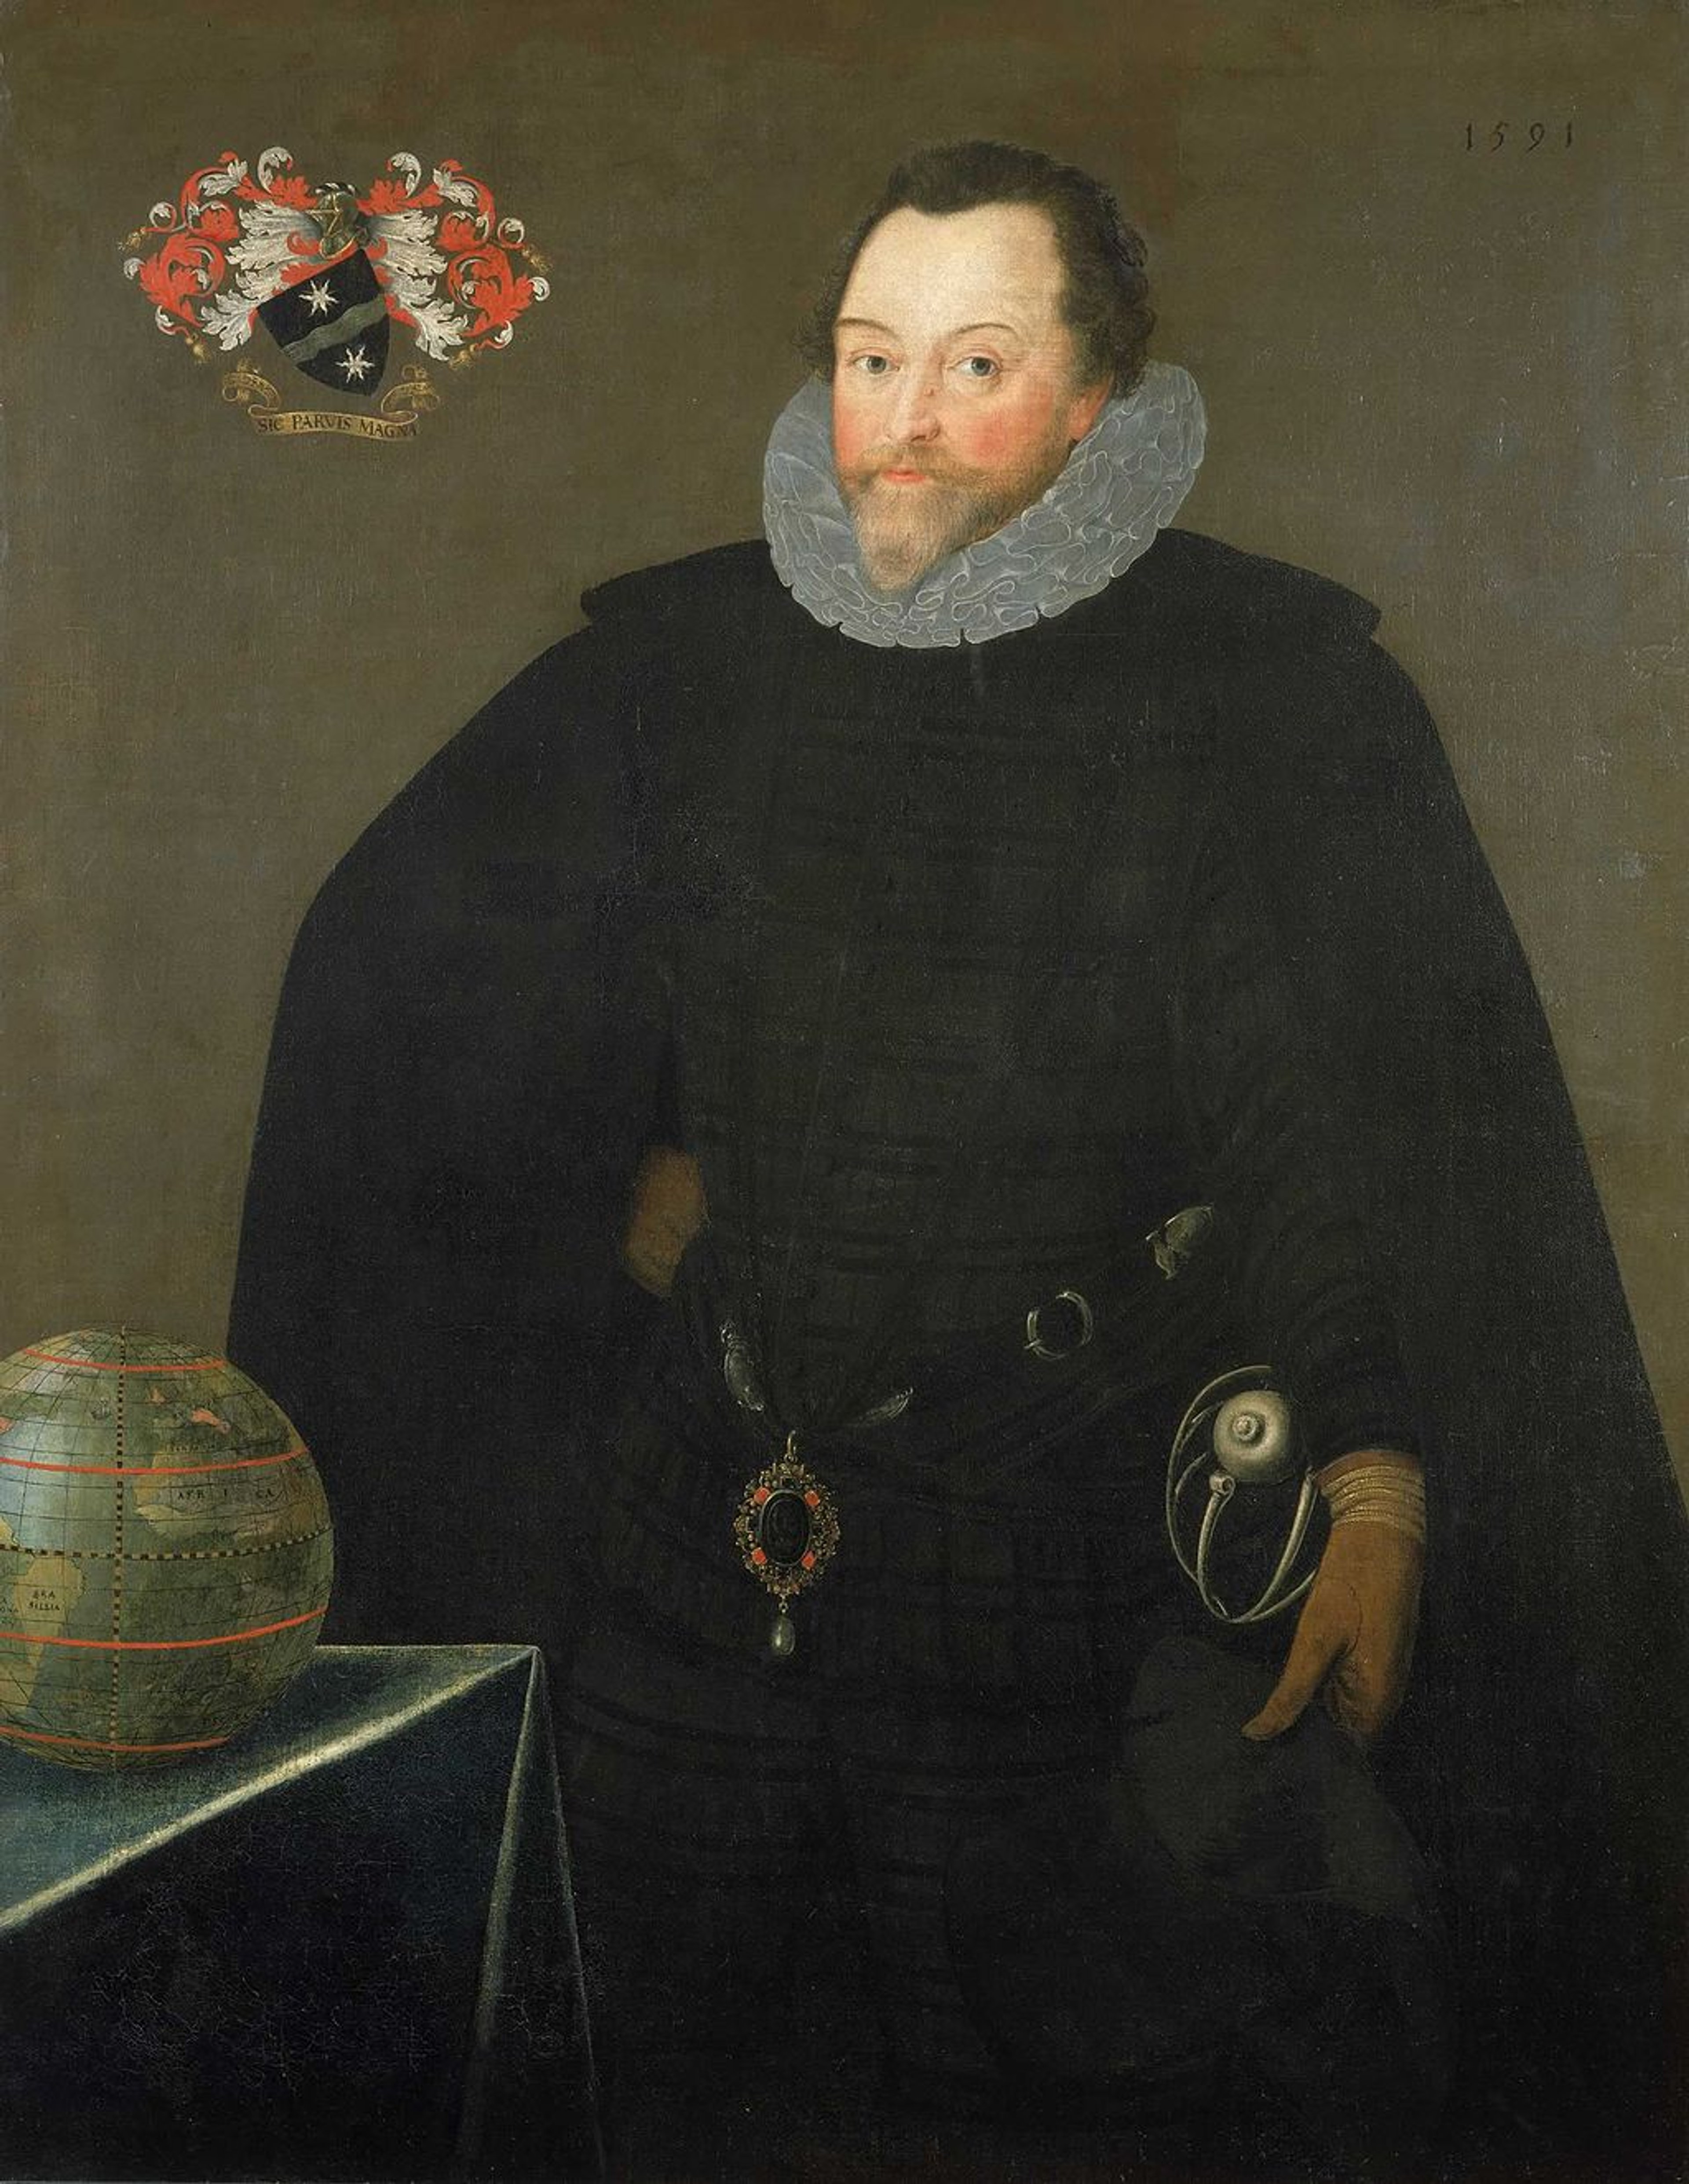 Colourful portrait of Francis Drake, a man who's wearing black robes with a short beard and stood beside a table with a globe. The portrait also features a coat of arms in the top left corner.